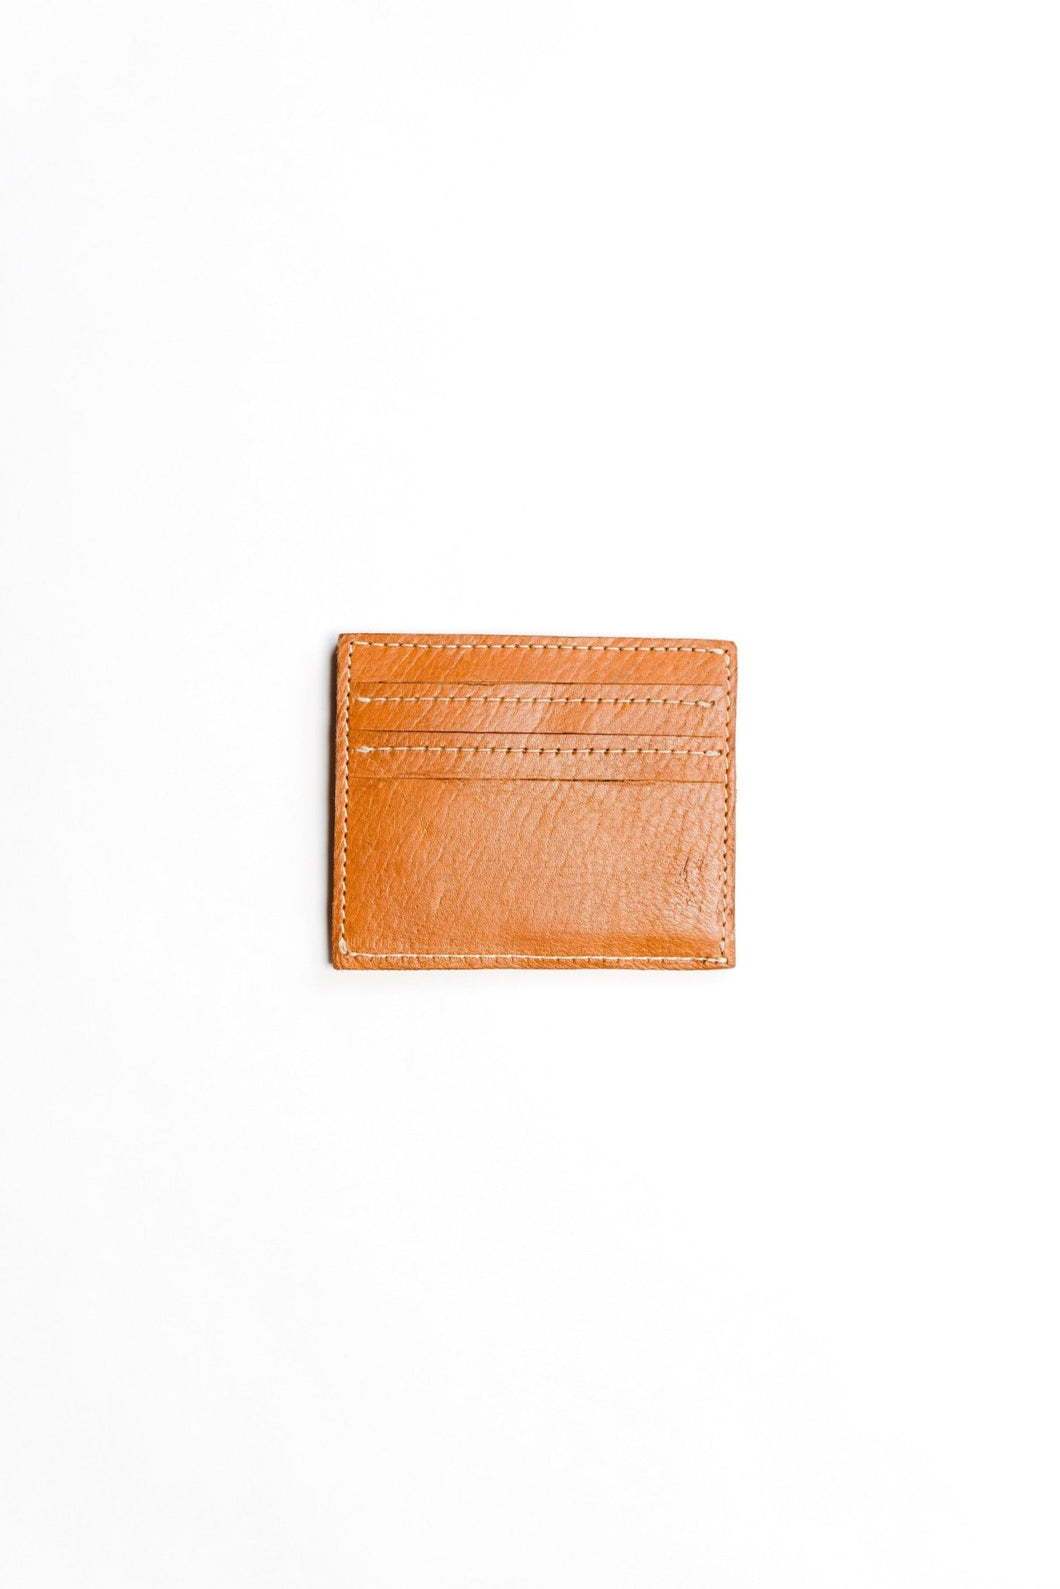 2nd Story Goods - 2nd Story Goods Minimalist Leather Wallet - | Delivery near me in ... Farm2Me #url#